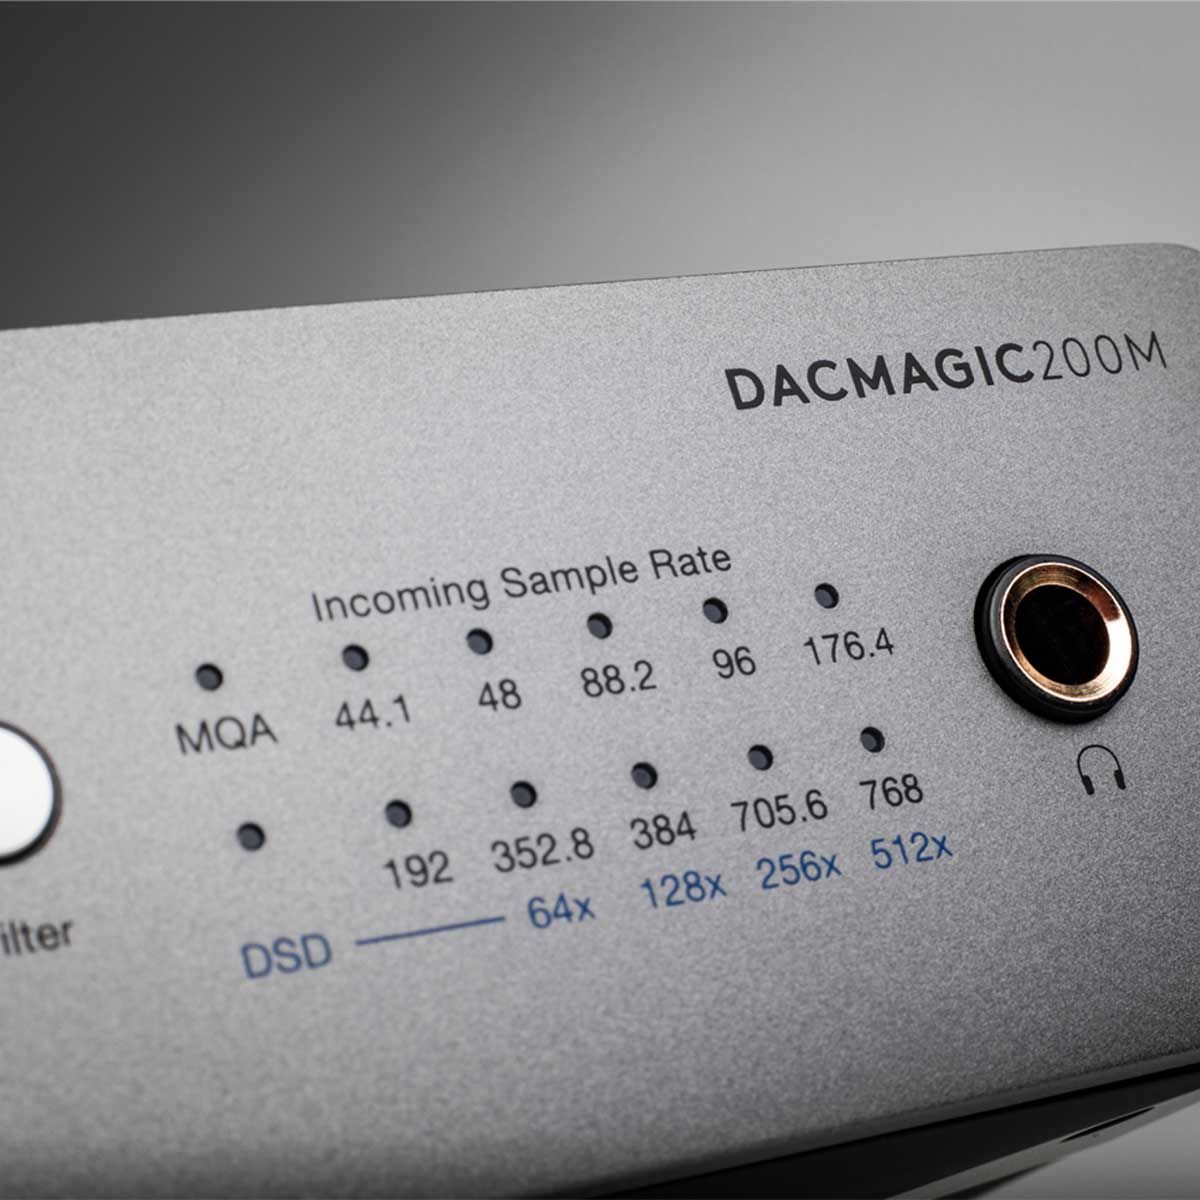 Cambridge Audio DacMagic 200 DAC & Preamplifier close-up of front display